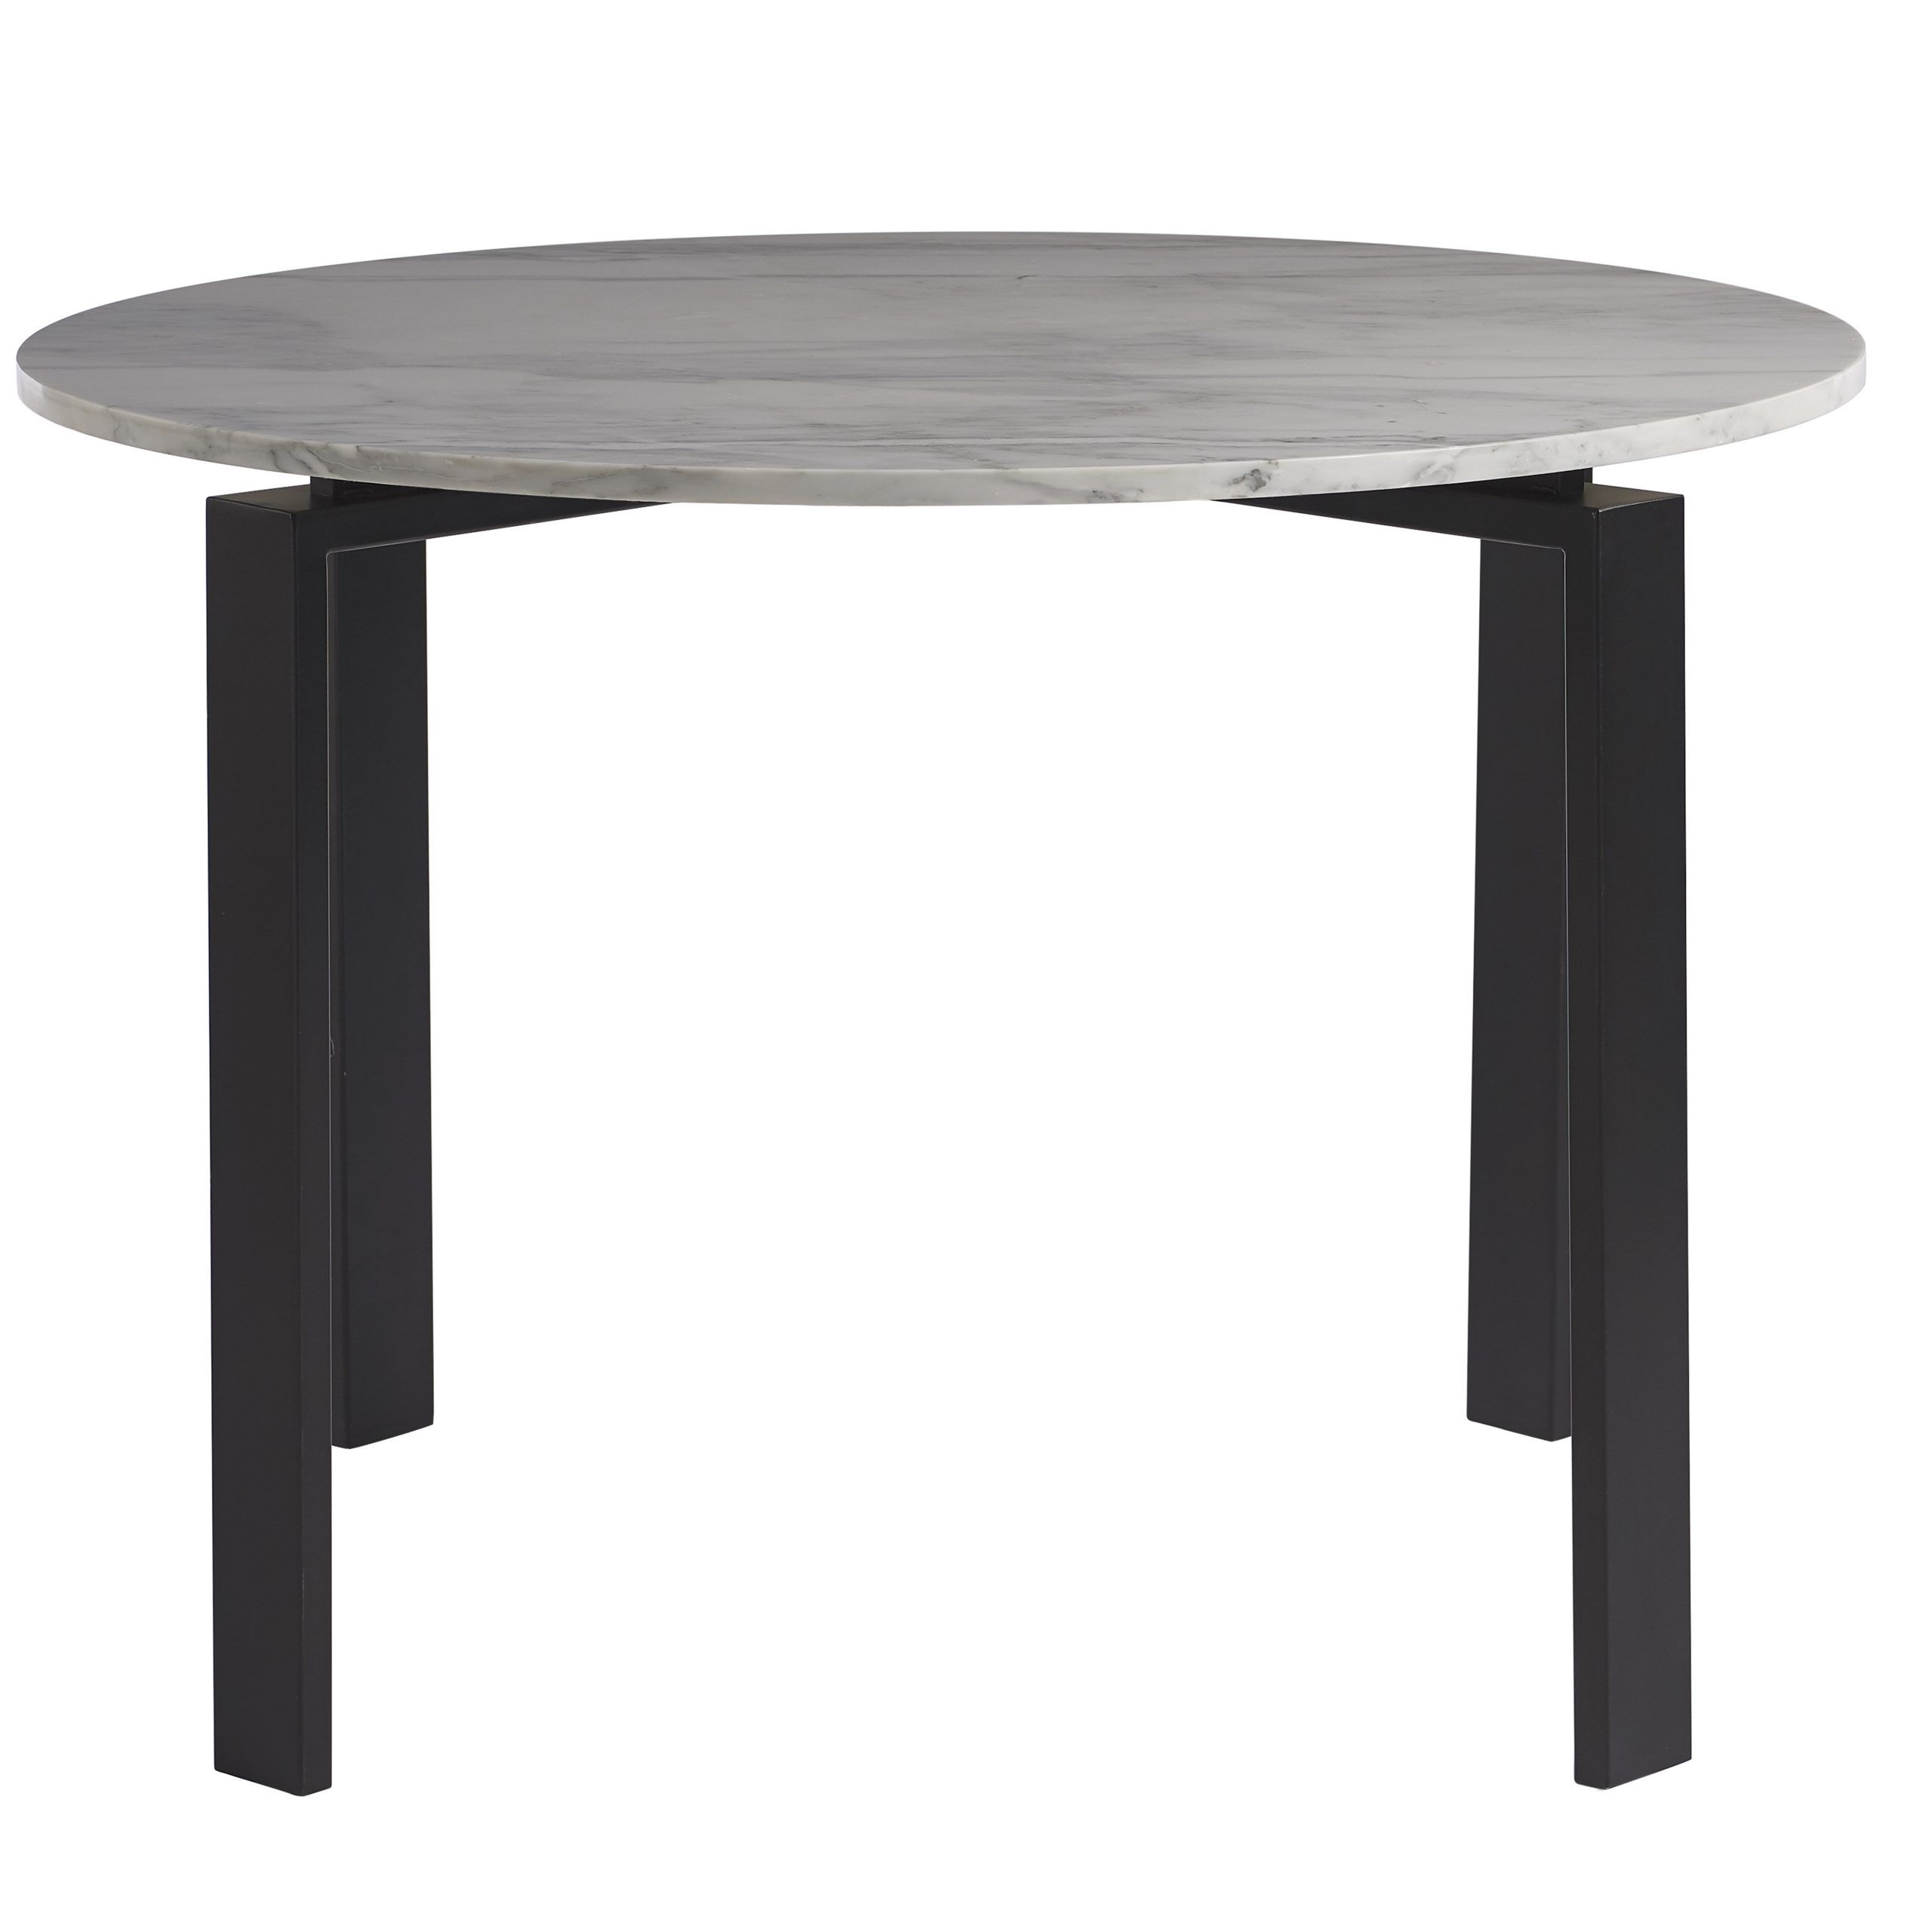 Beaudette Dining Table Pertaining To Recent Cleary Oval Dining Pedestal Tables (View 12 of 25)